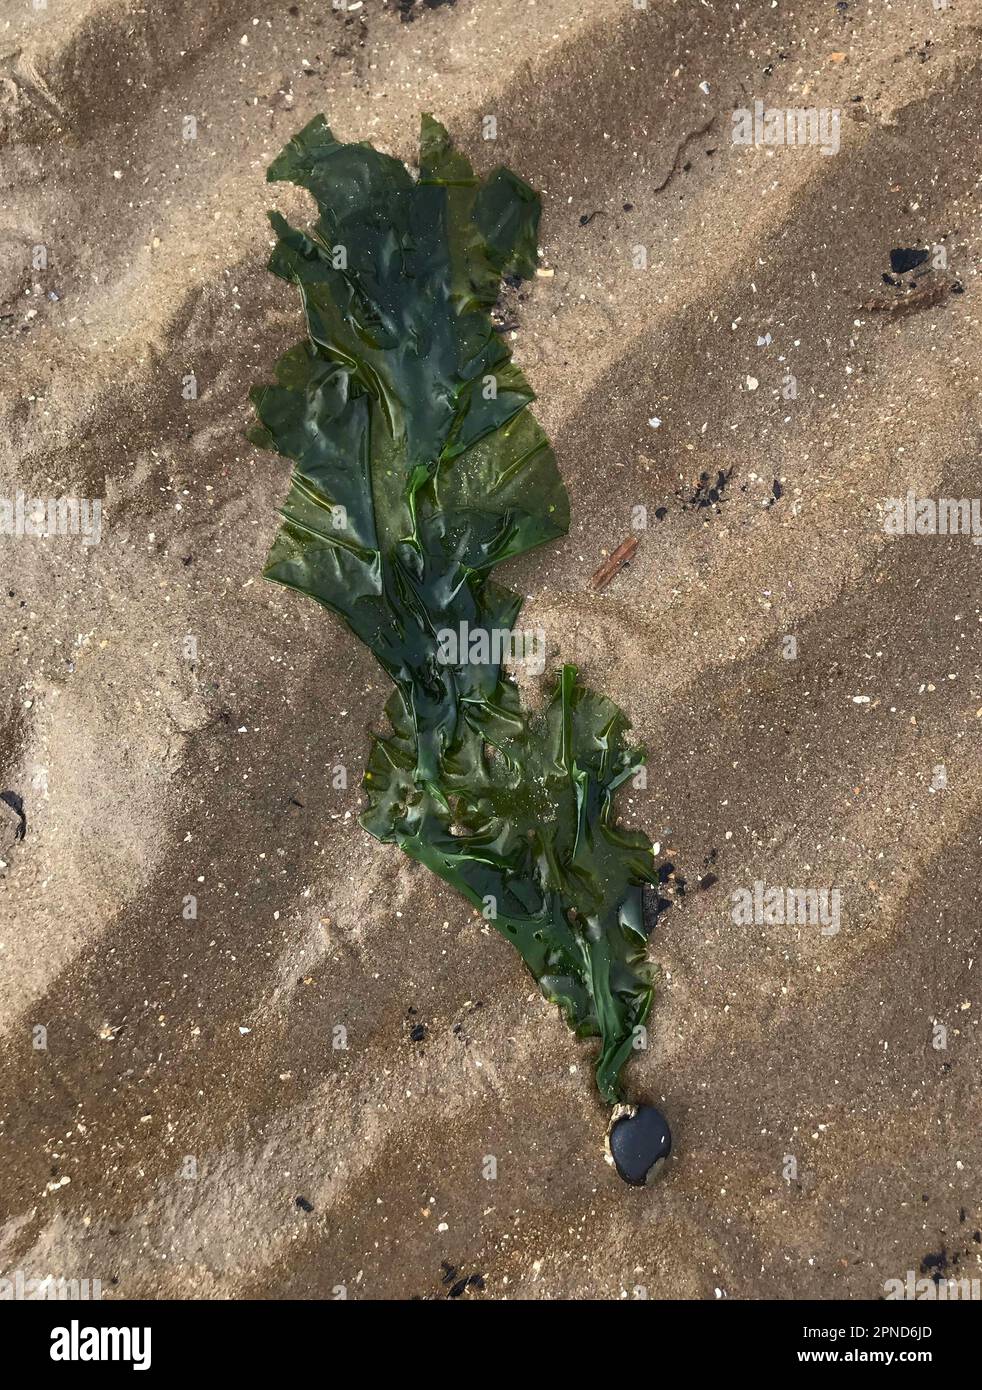 Sea lettuce (Ulva lactuca), an edible algae, washed up after a storm, still attached to a stone The evening light turns the ripple on the sand golden. Stock Photo